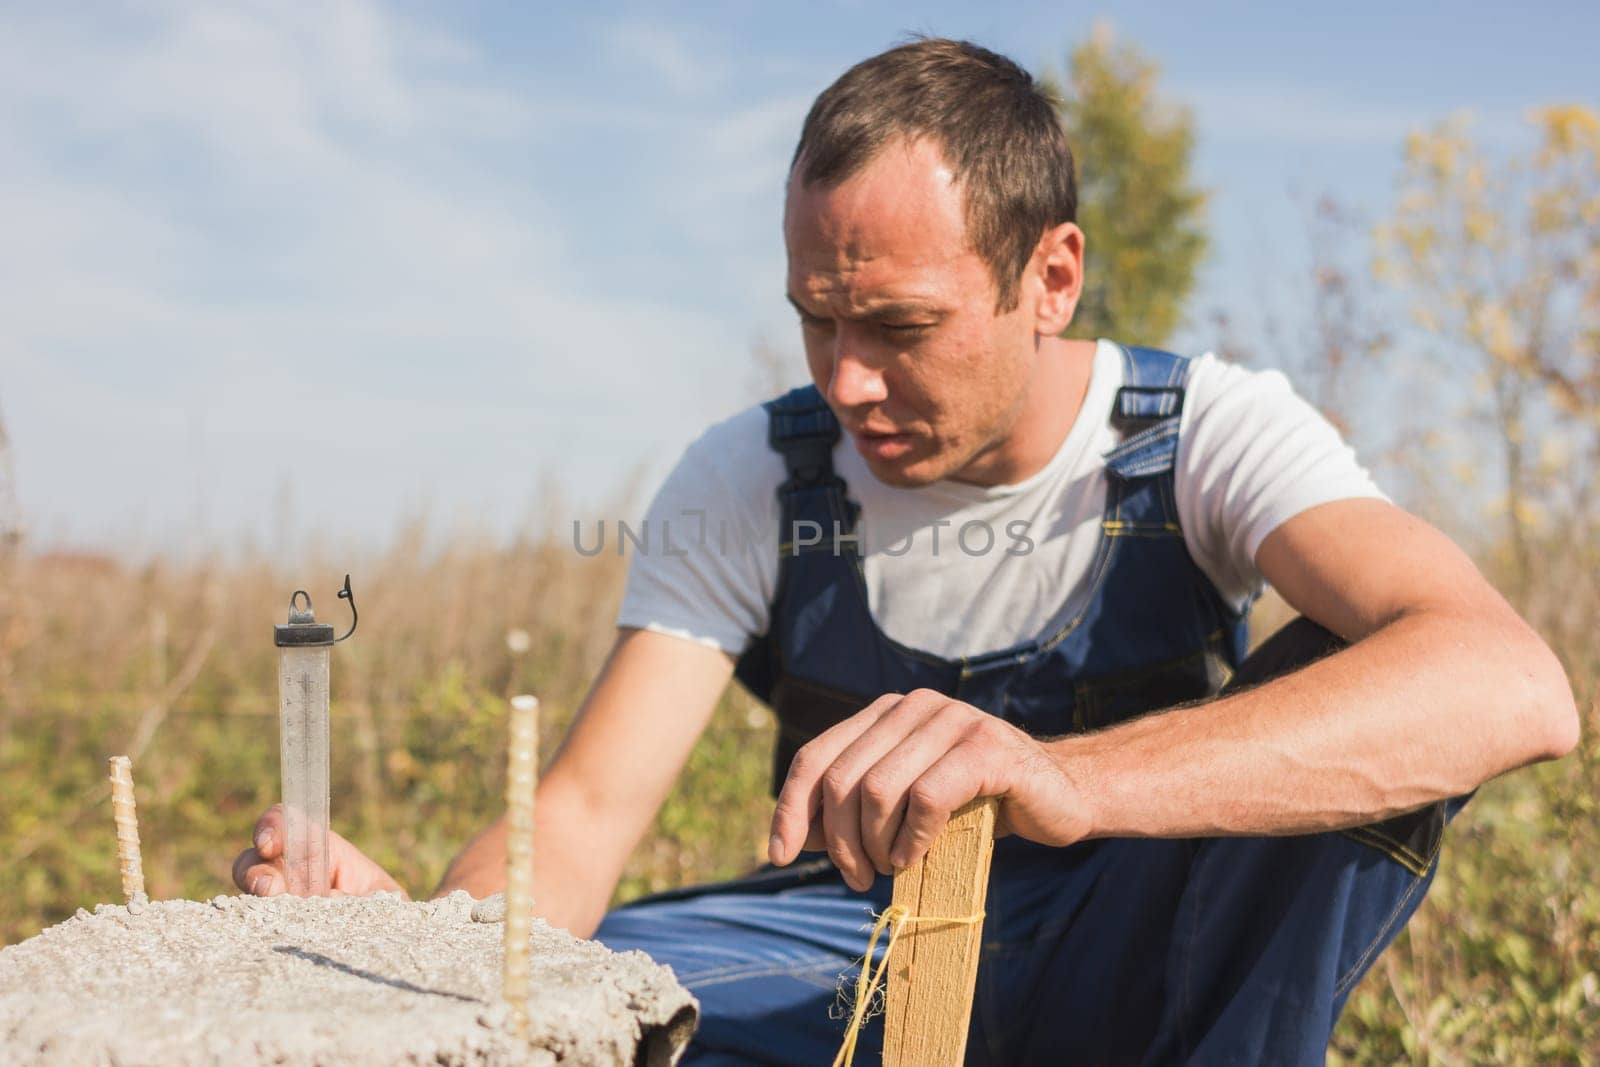 Worker builder in jumpsuit working outdoors, portrait, close up